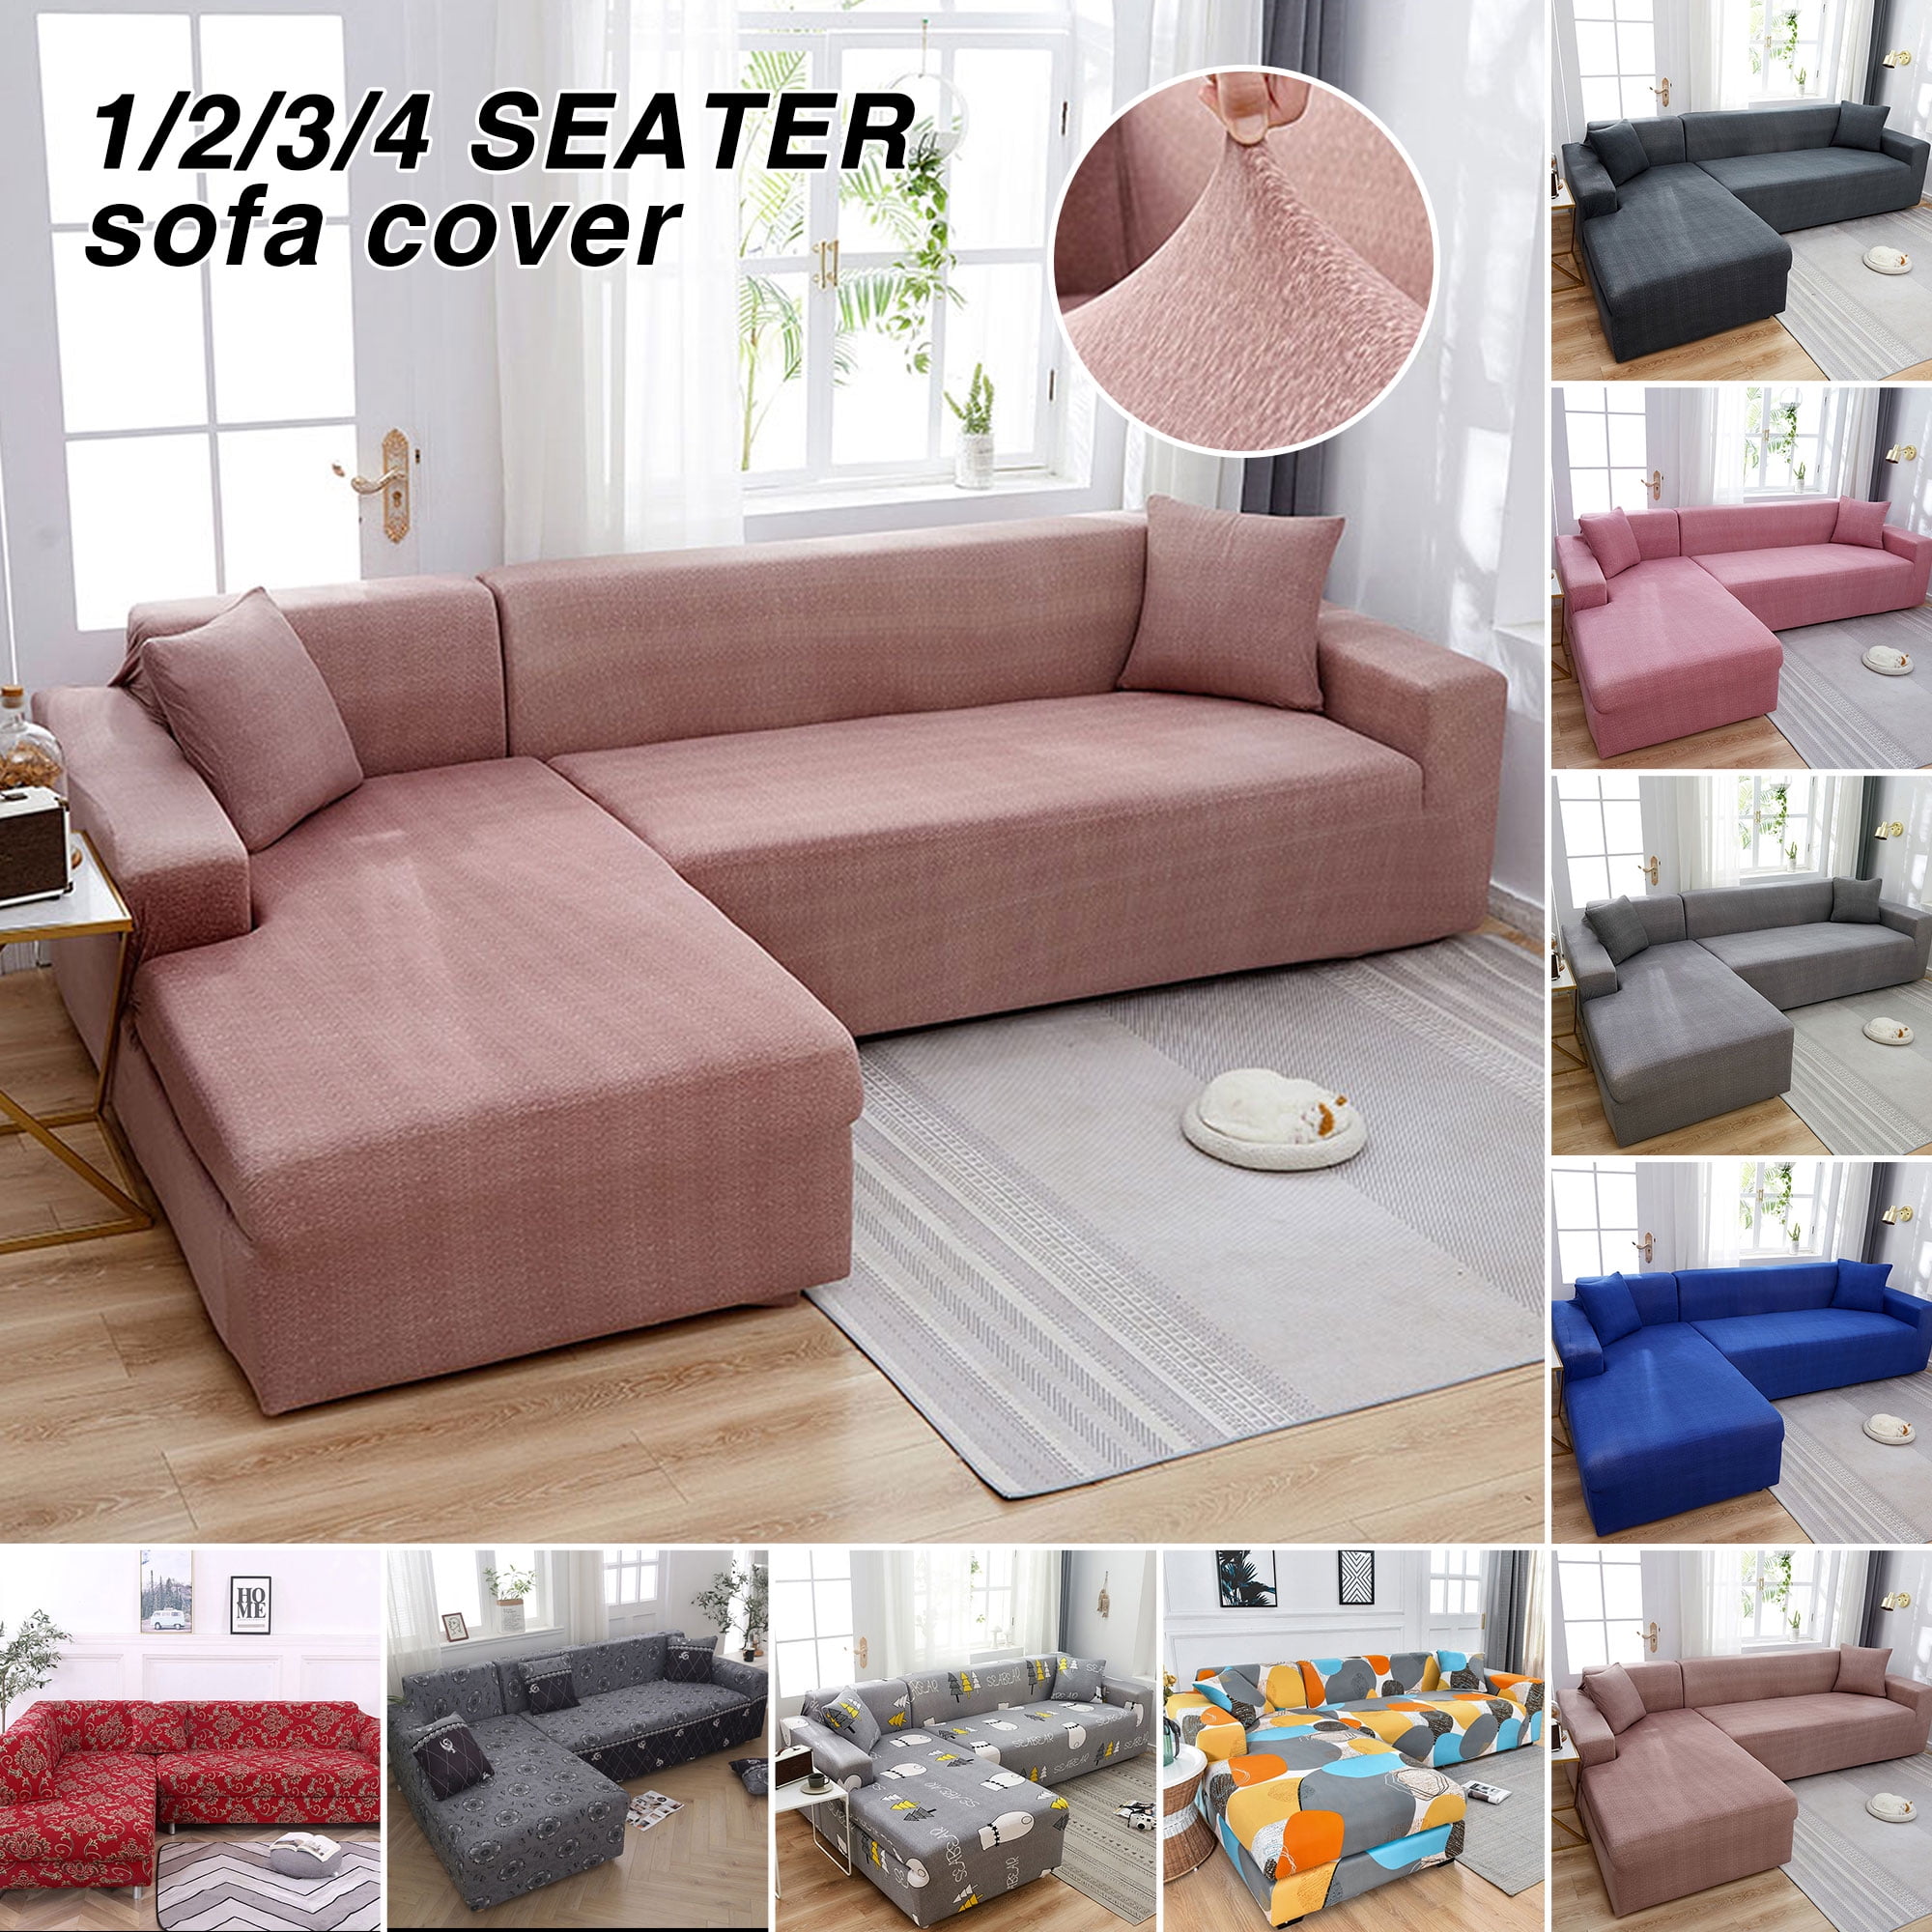 Details about   Stretch Sofa Covers 3 Seater Couch Chair Covers 1/2/3/4 Seater l Shape for Room